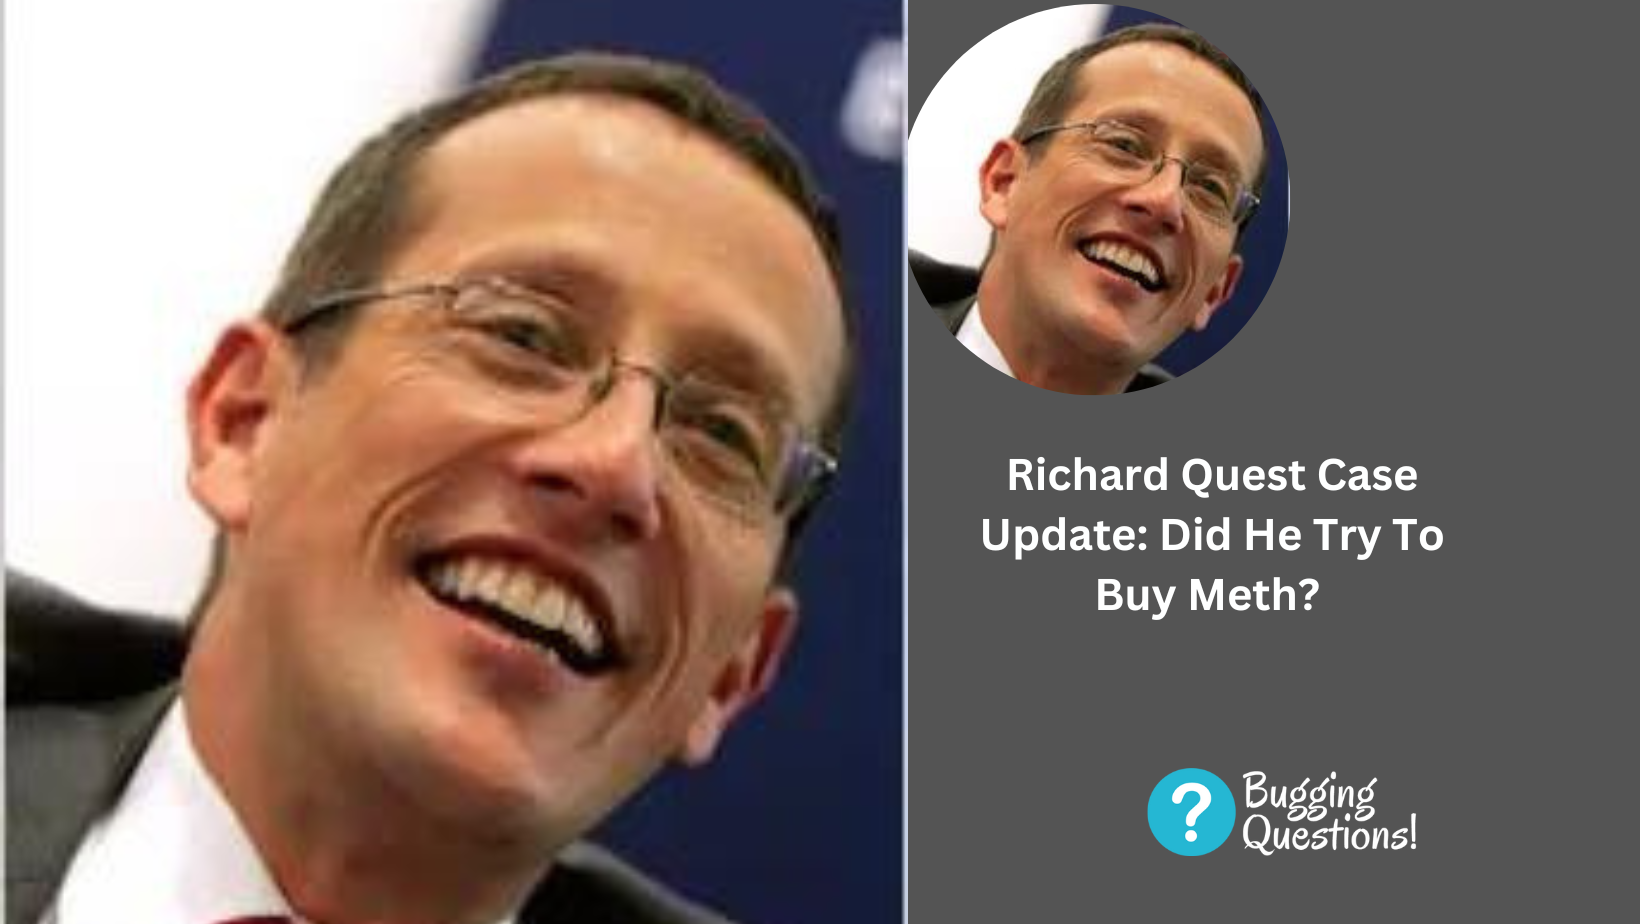 Richard Quest Case Update: Did He Try To Buy Meth? Age And Case Update In Detail